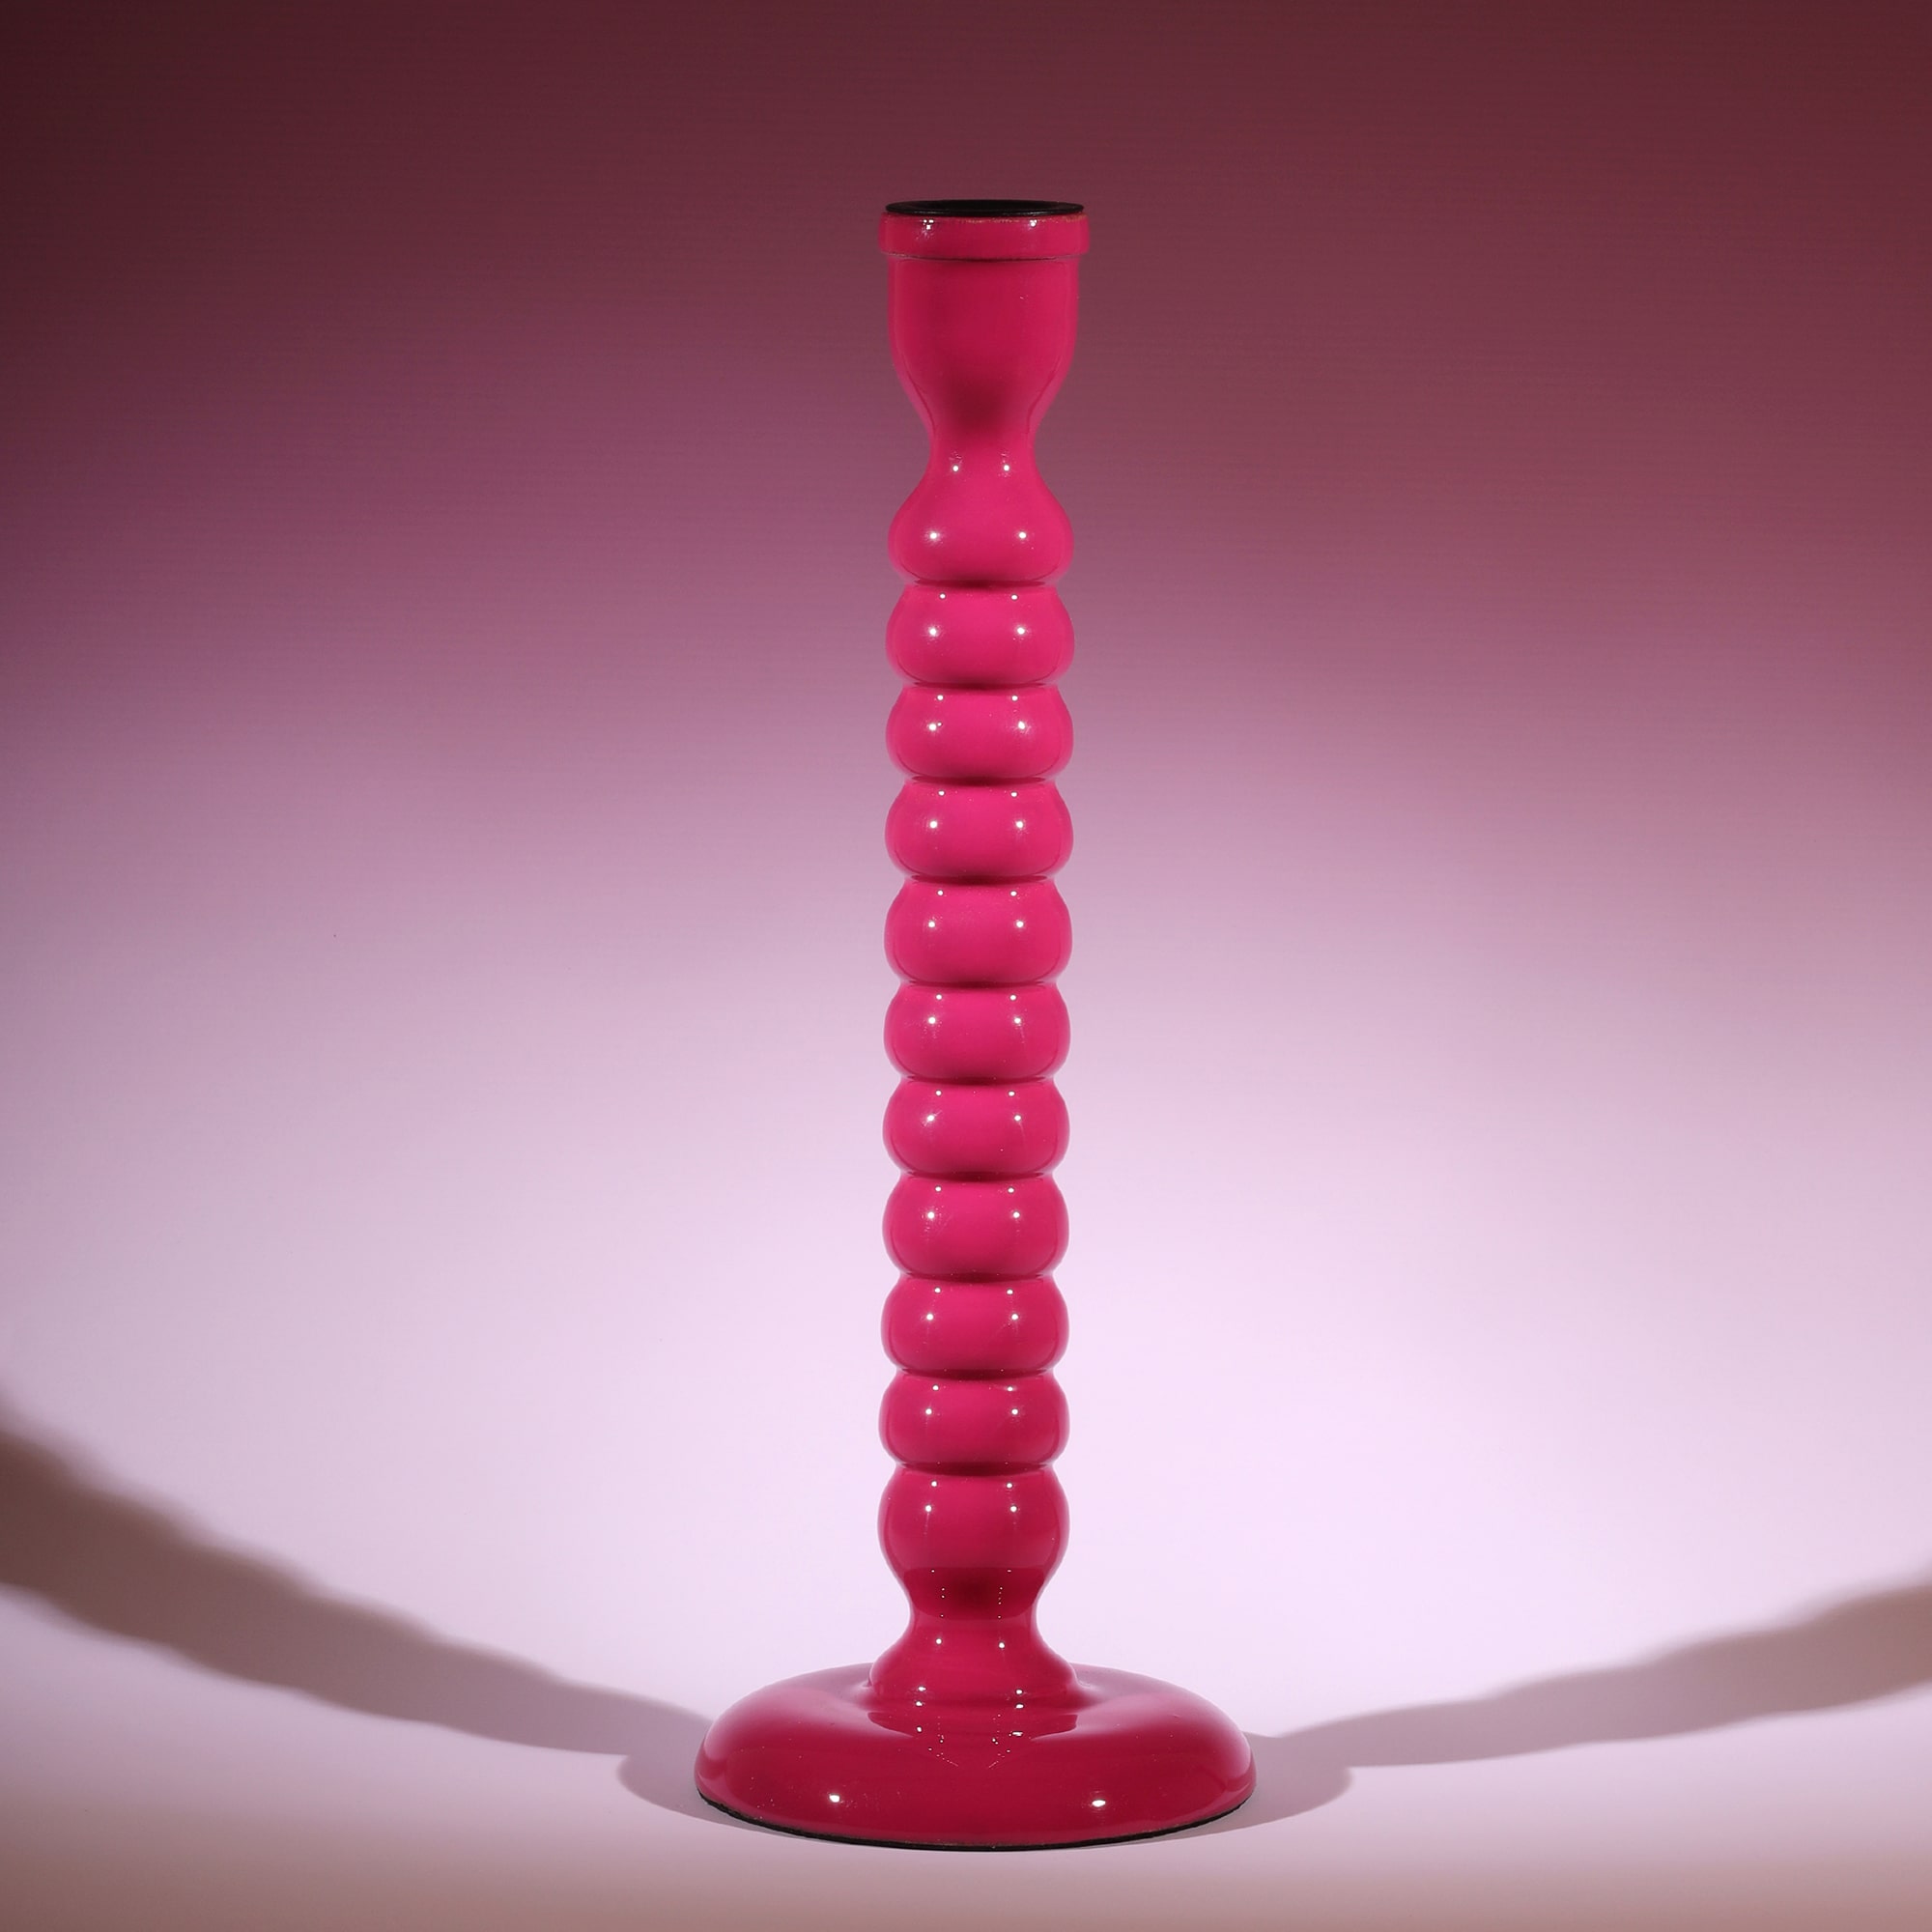 Fuschia Polished Lacquer Candle holder,it is twisted all the way down like a corkscrew tapered at the bottom.